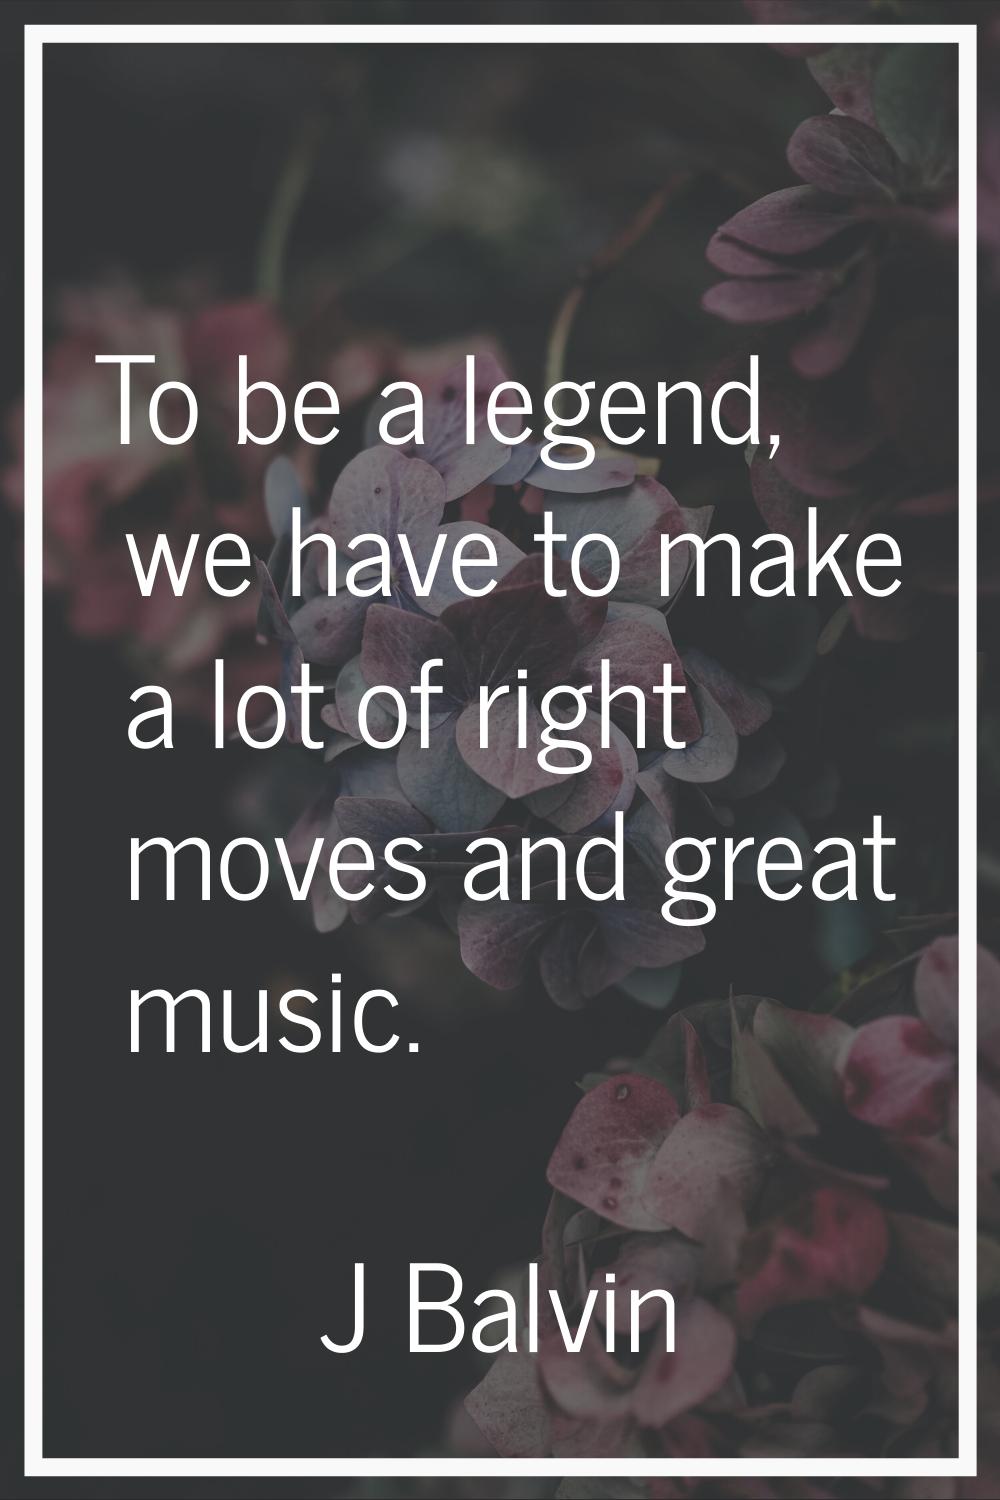 To be a legend, we have to make a lot of right moves and great music.